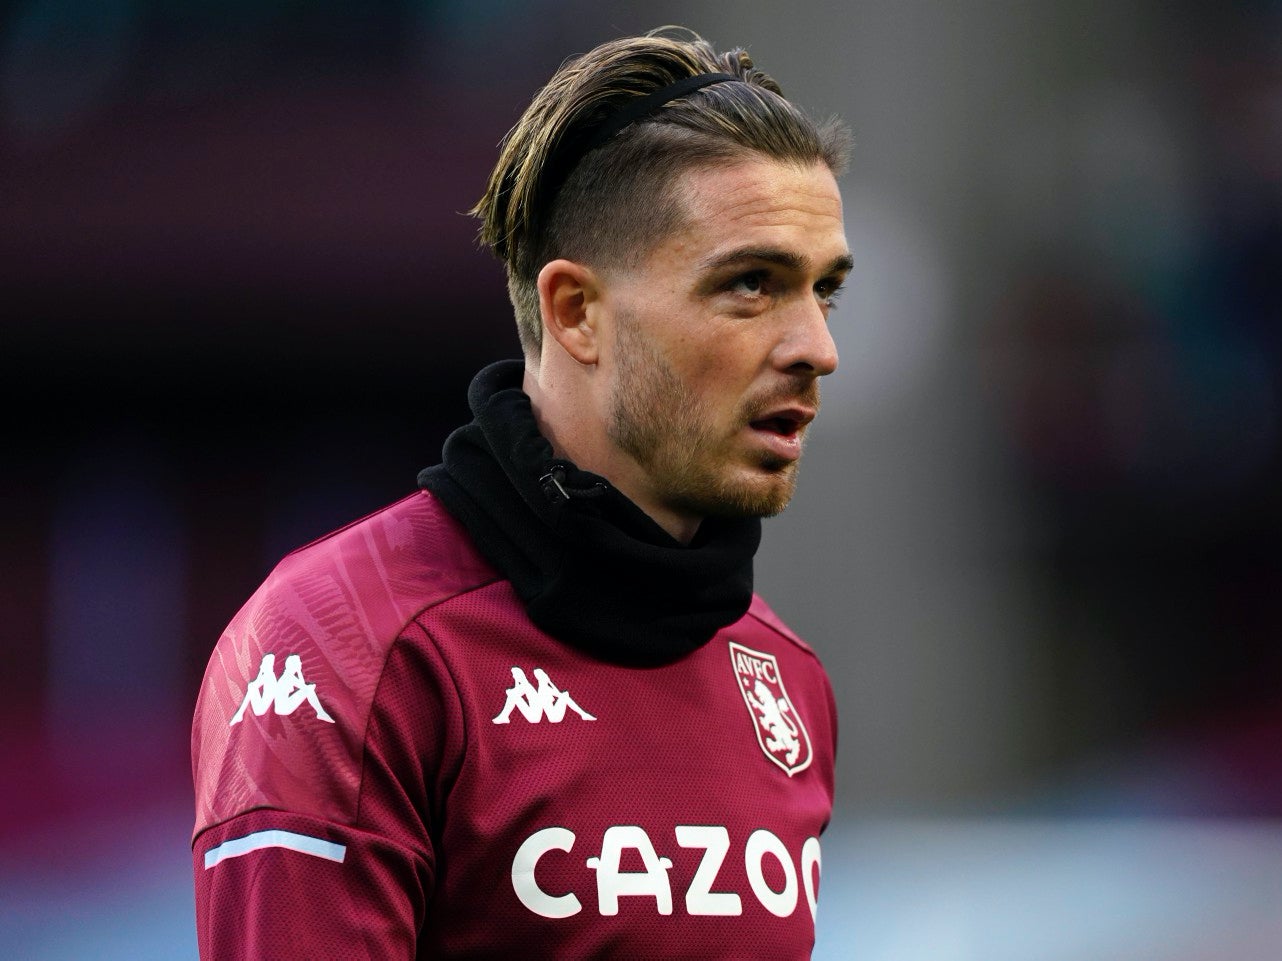 Grealish explained he was speeding due to being late for training